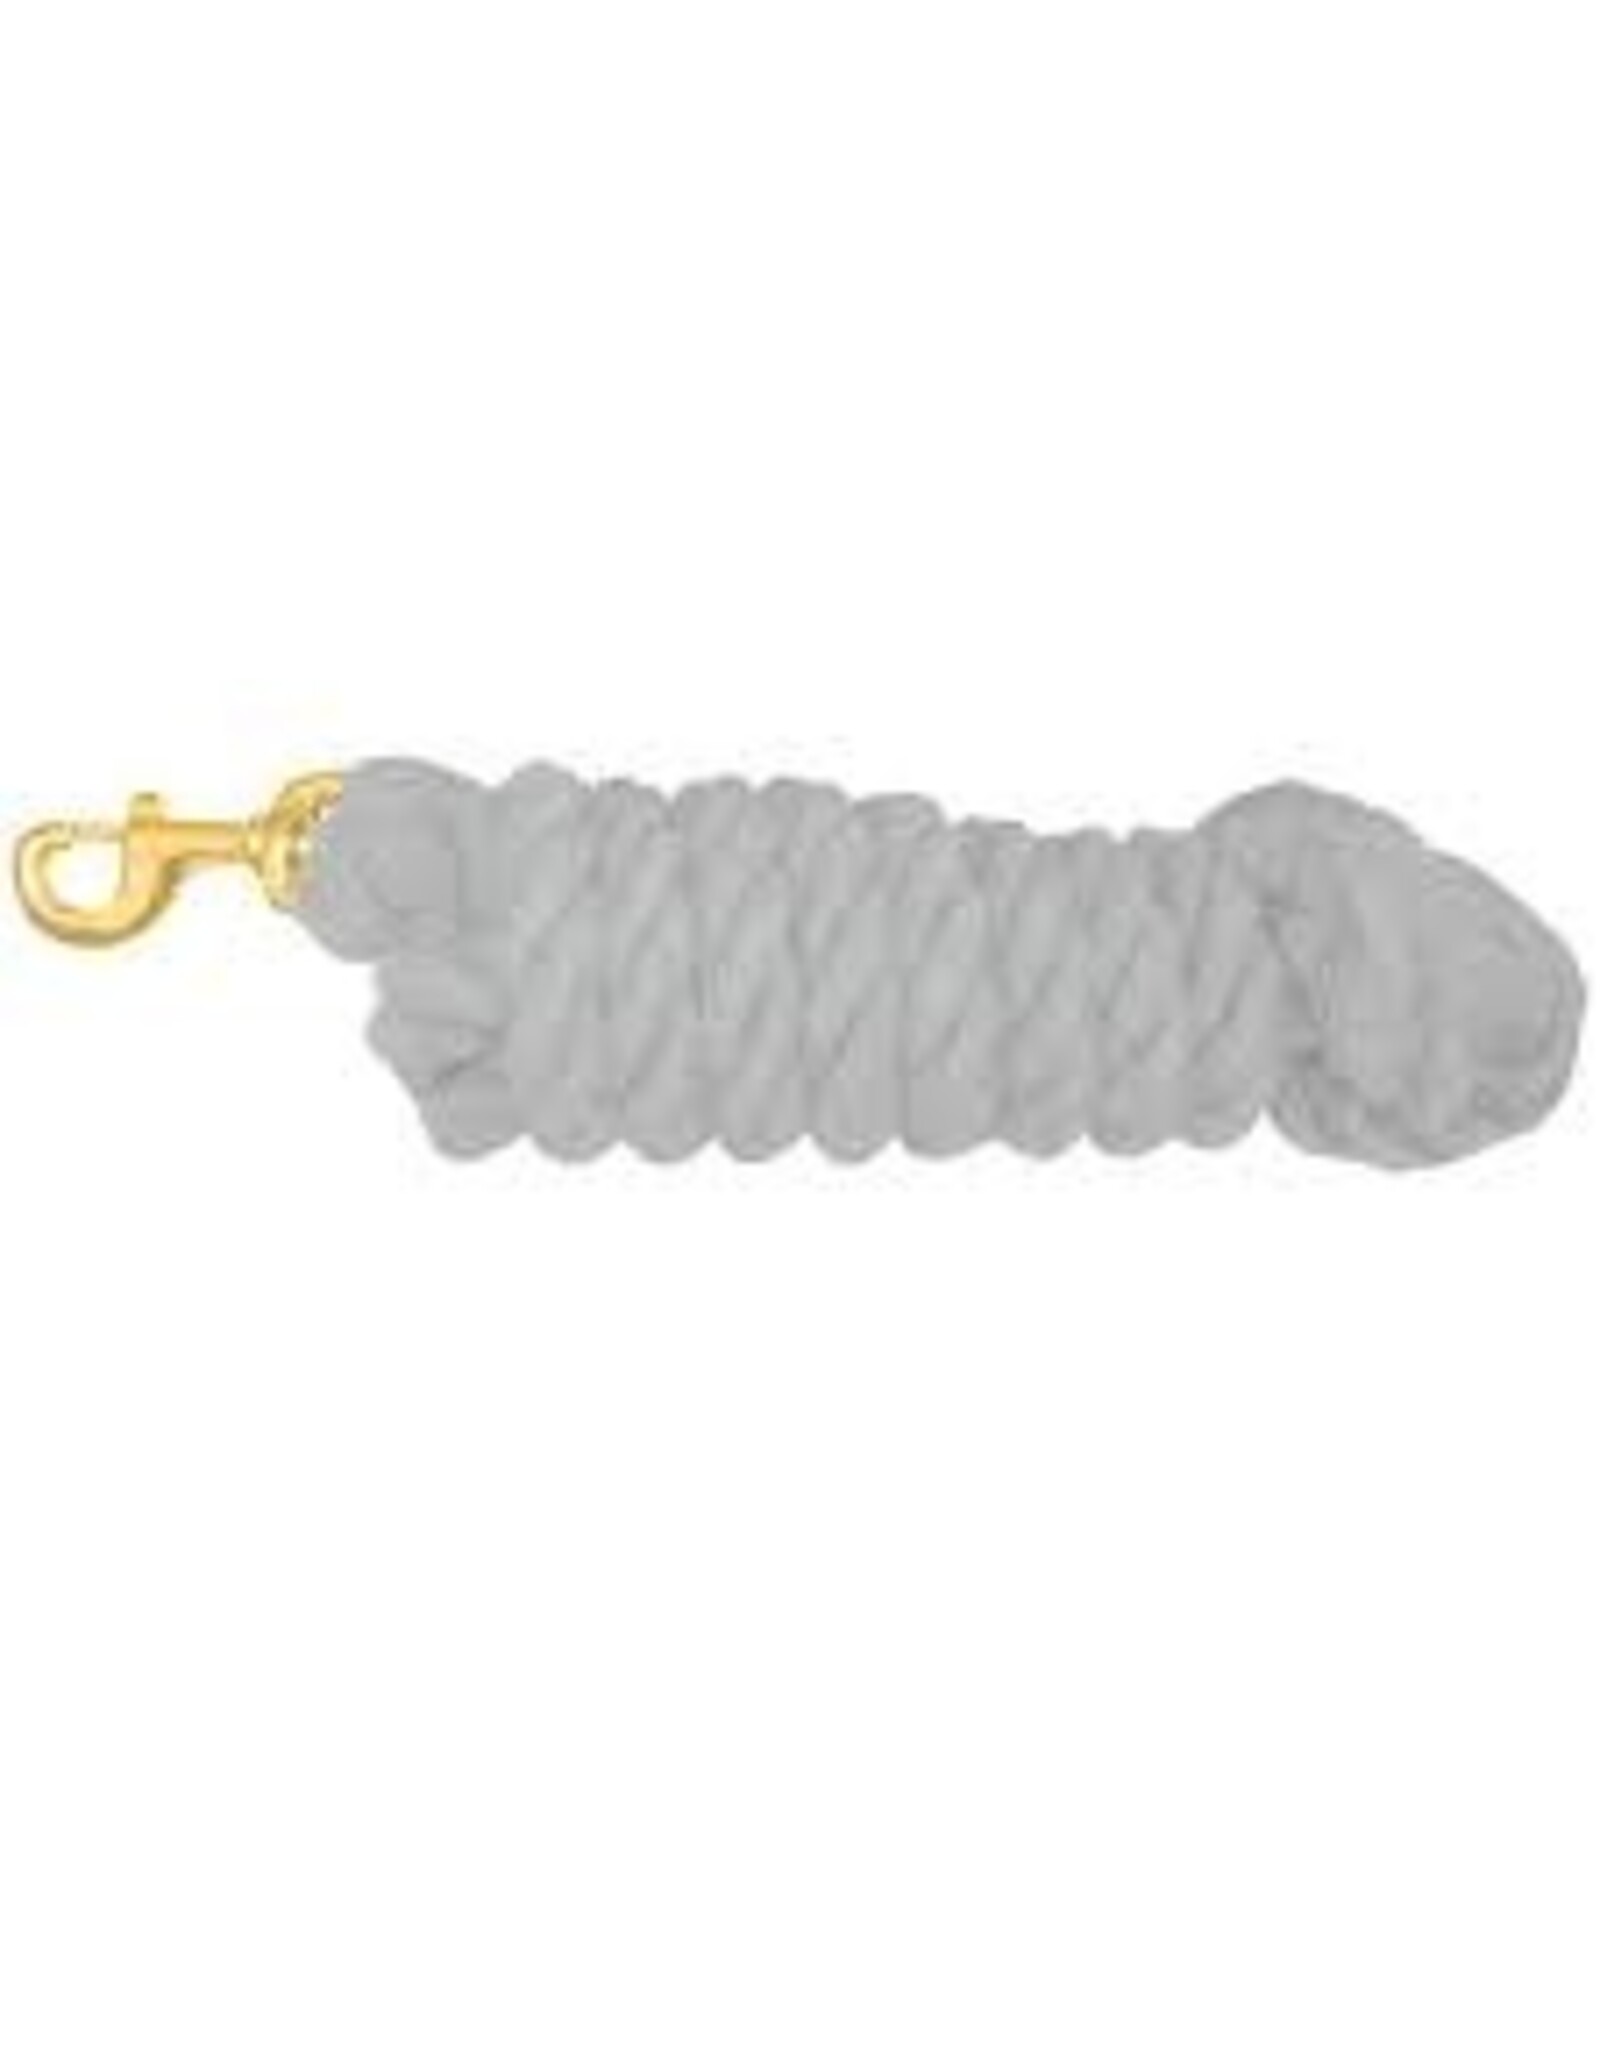 Cotton Rope Lead Shank 9/16" - 6' / Brass Bolt Snap -  White - TP2509A-WH